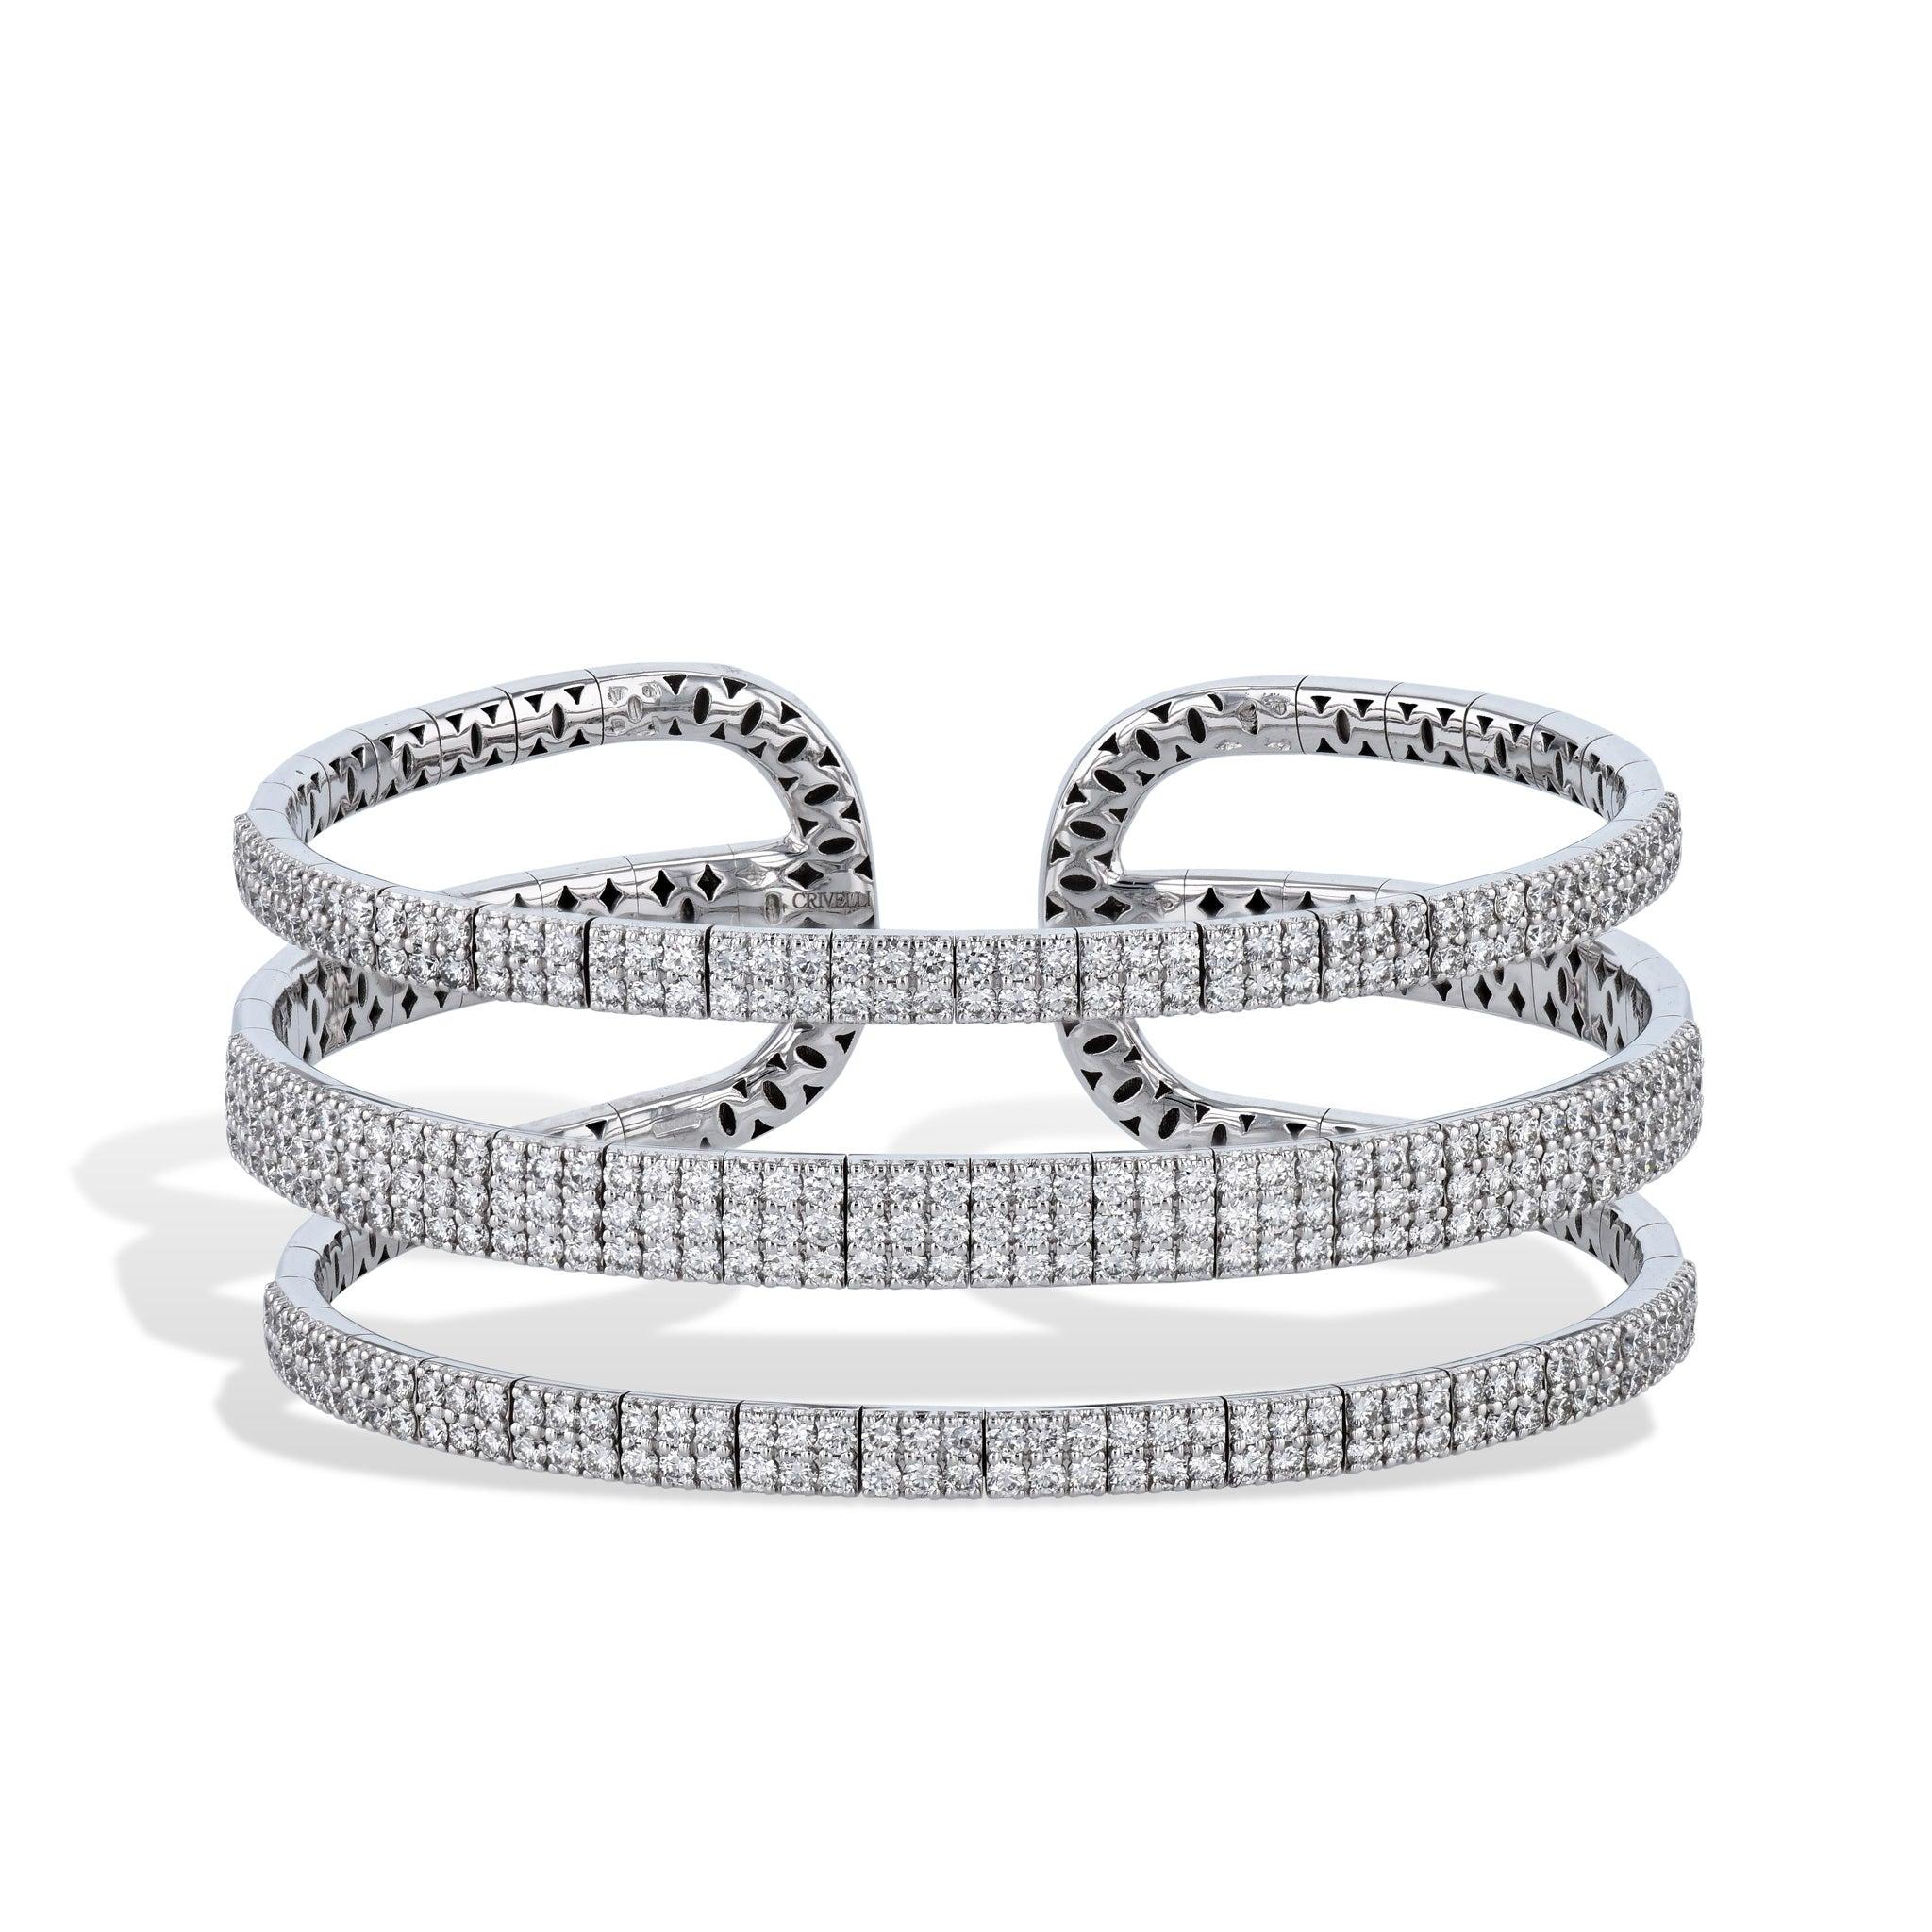 This stunning Three Row White Gold  Pave Diamond Cuff Bracelet features 5.88ct TW F-SI diamonds in an 18kt white gold setting for a luxurious look.
Three Row White Gold Diamond Cuff Bracelet.
Diamond Pave.

5.88ct TW F-SI diamonds.
18kt White gold.

